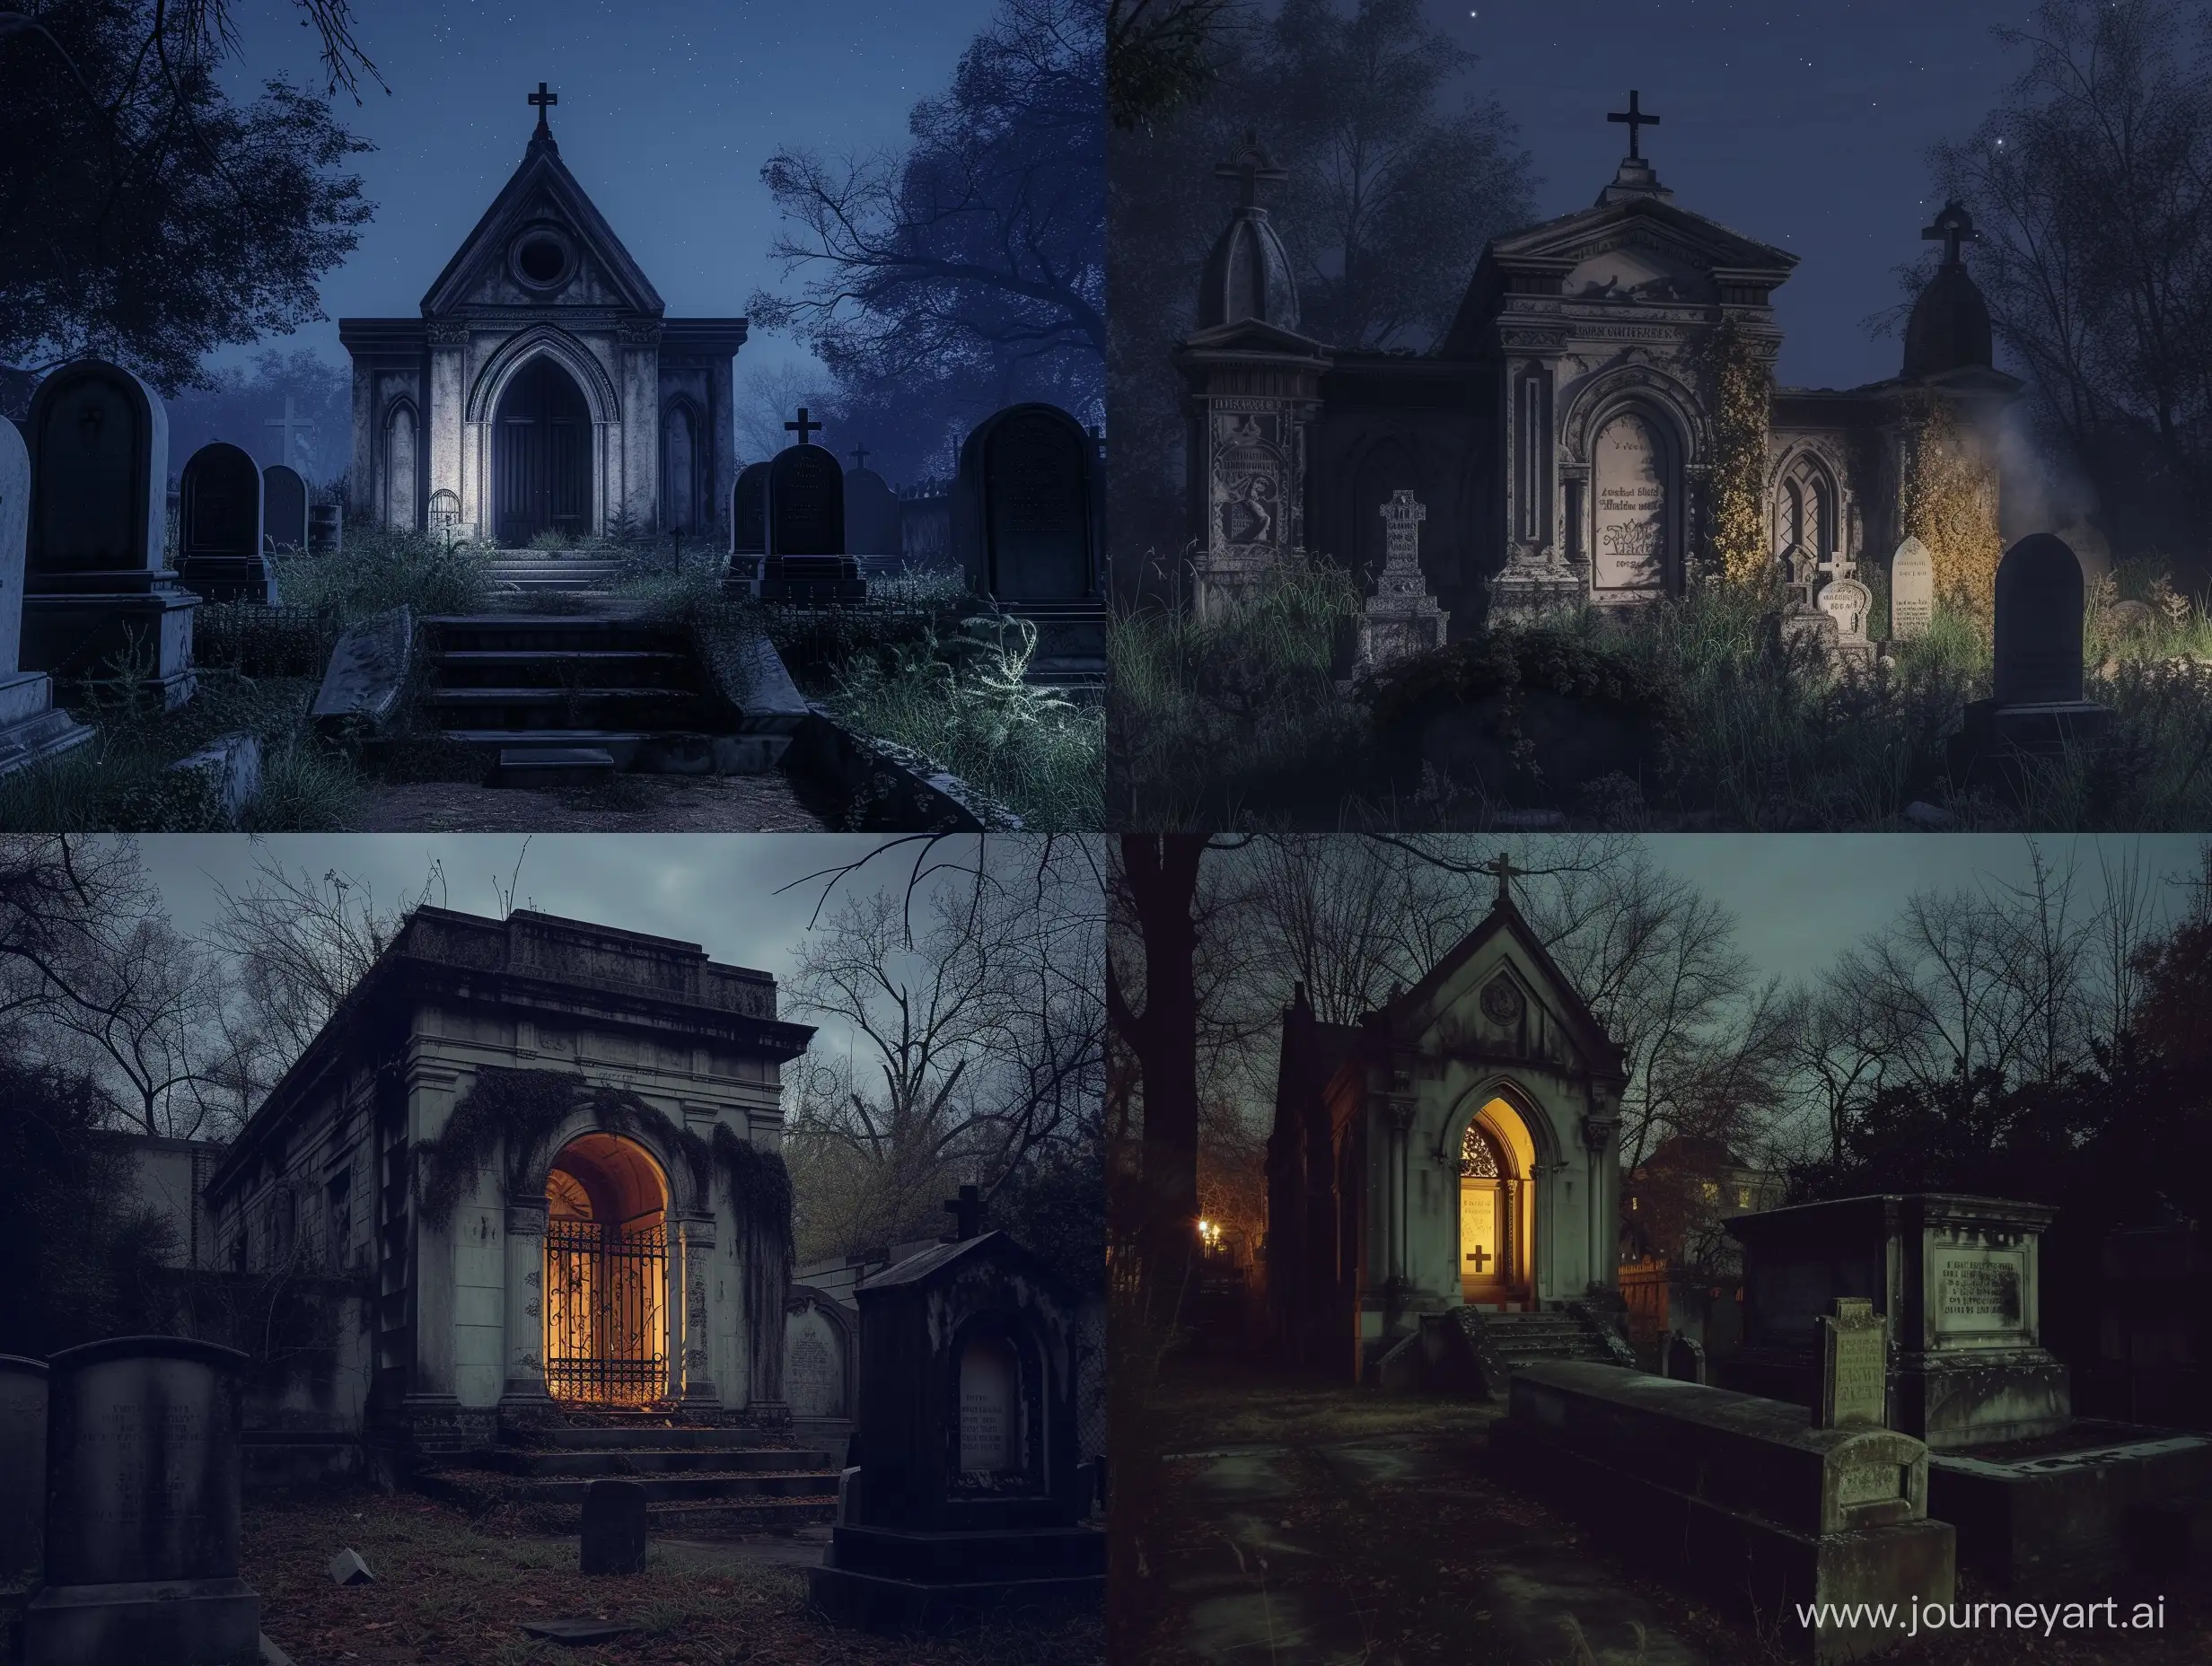 Eerie-Night-View-of-an-Old-American-Cemetery-in-Darkest-Dungeon-Style